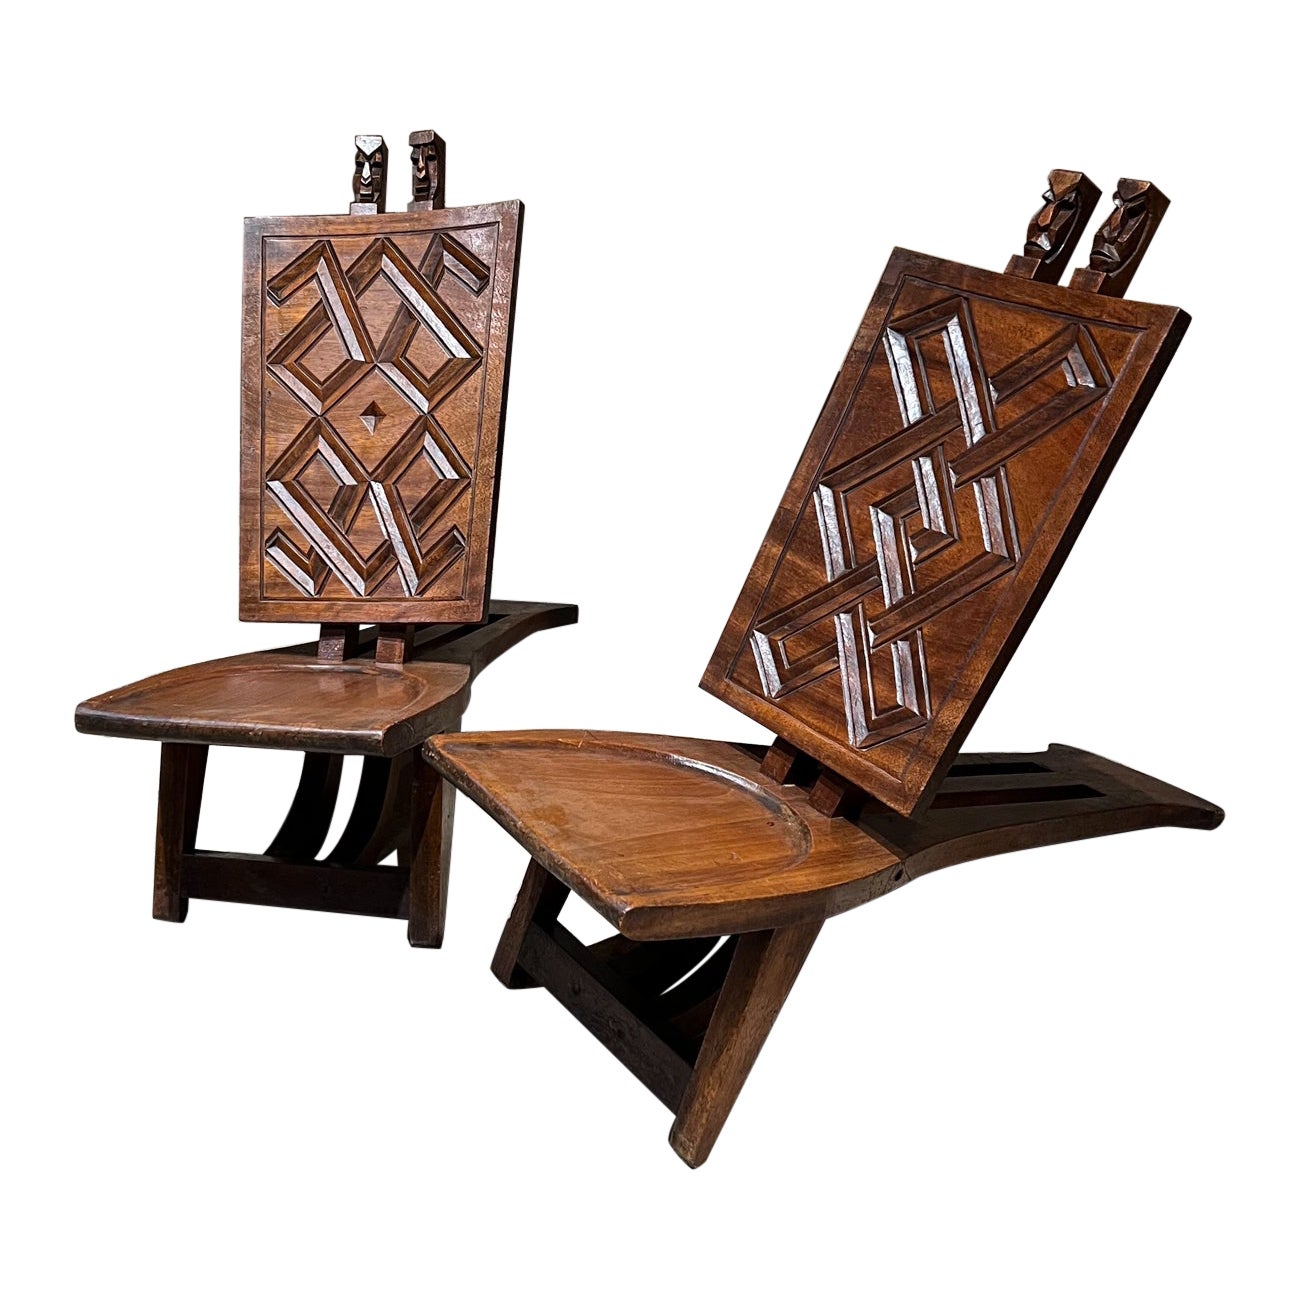 1960s African Ceremonial Chief Chairs Hand Carved Wood